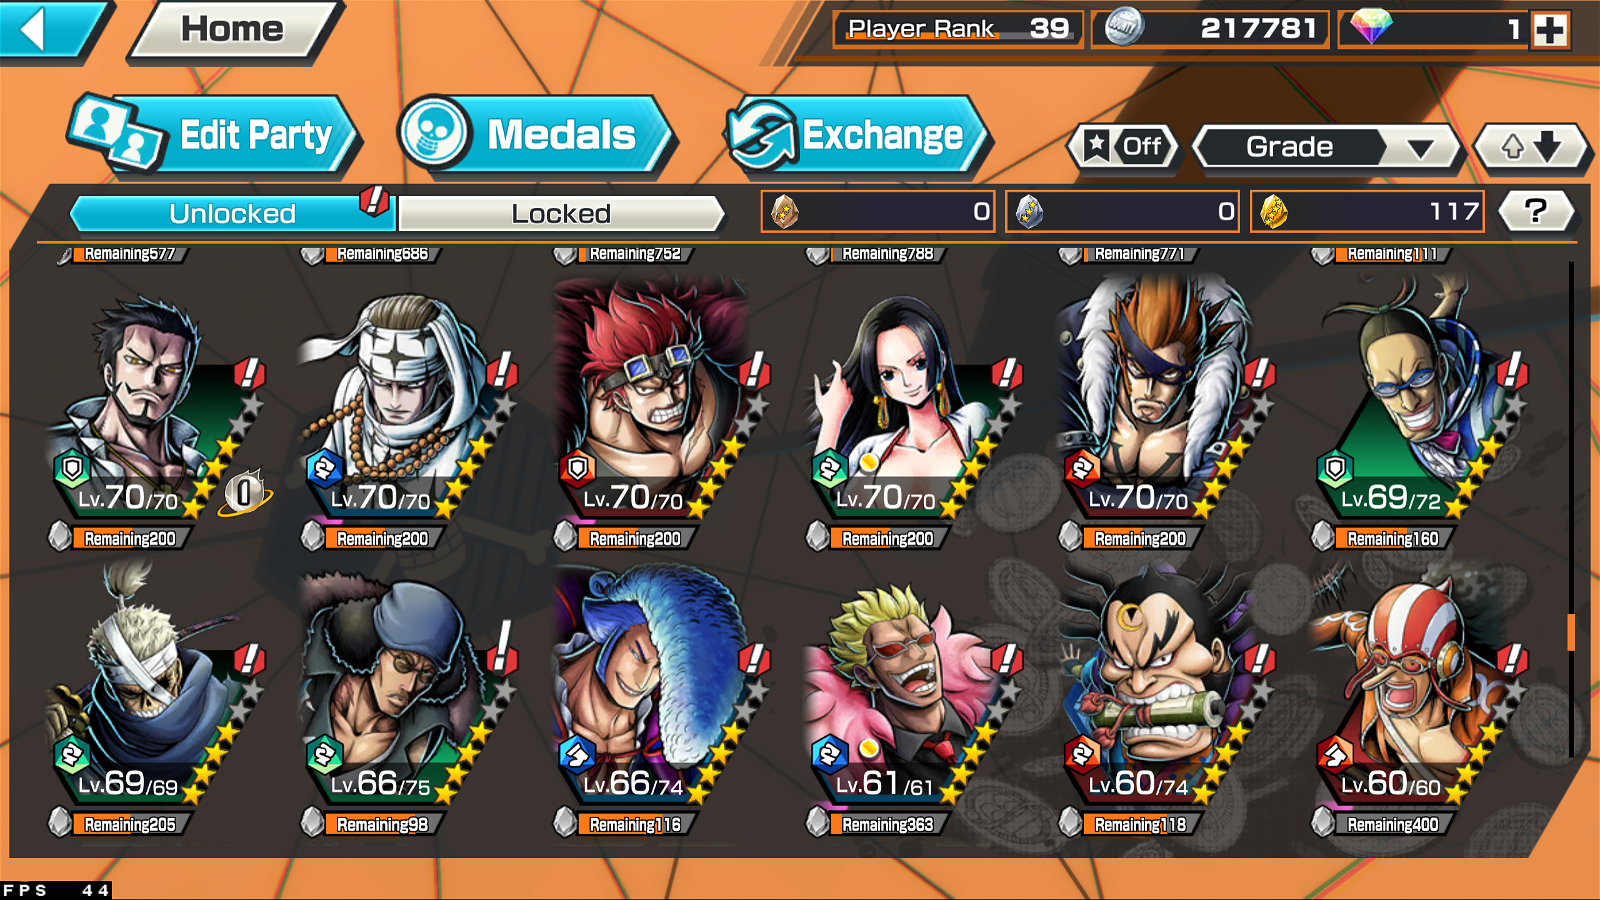 OPBR Account] 4 Extreme Max, Extreme Shanks FR Max, Extreme Olin Max, Extreme Roger Max, Extreme Yamato Max, HyperBoost 6, 49 Medals Max, Global